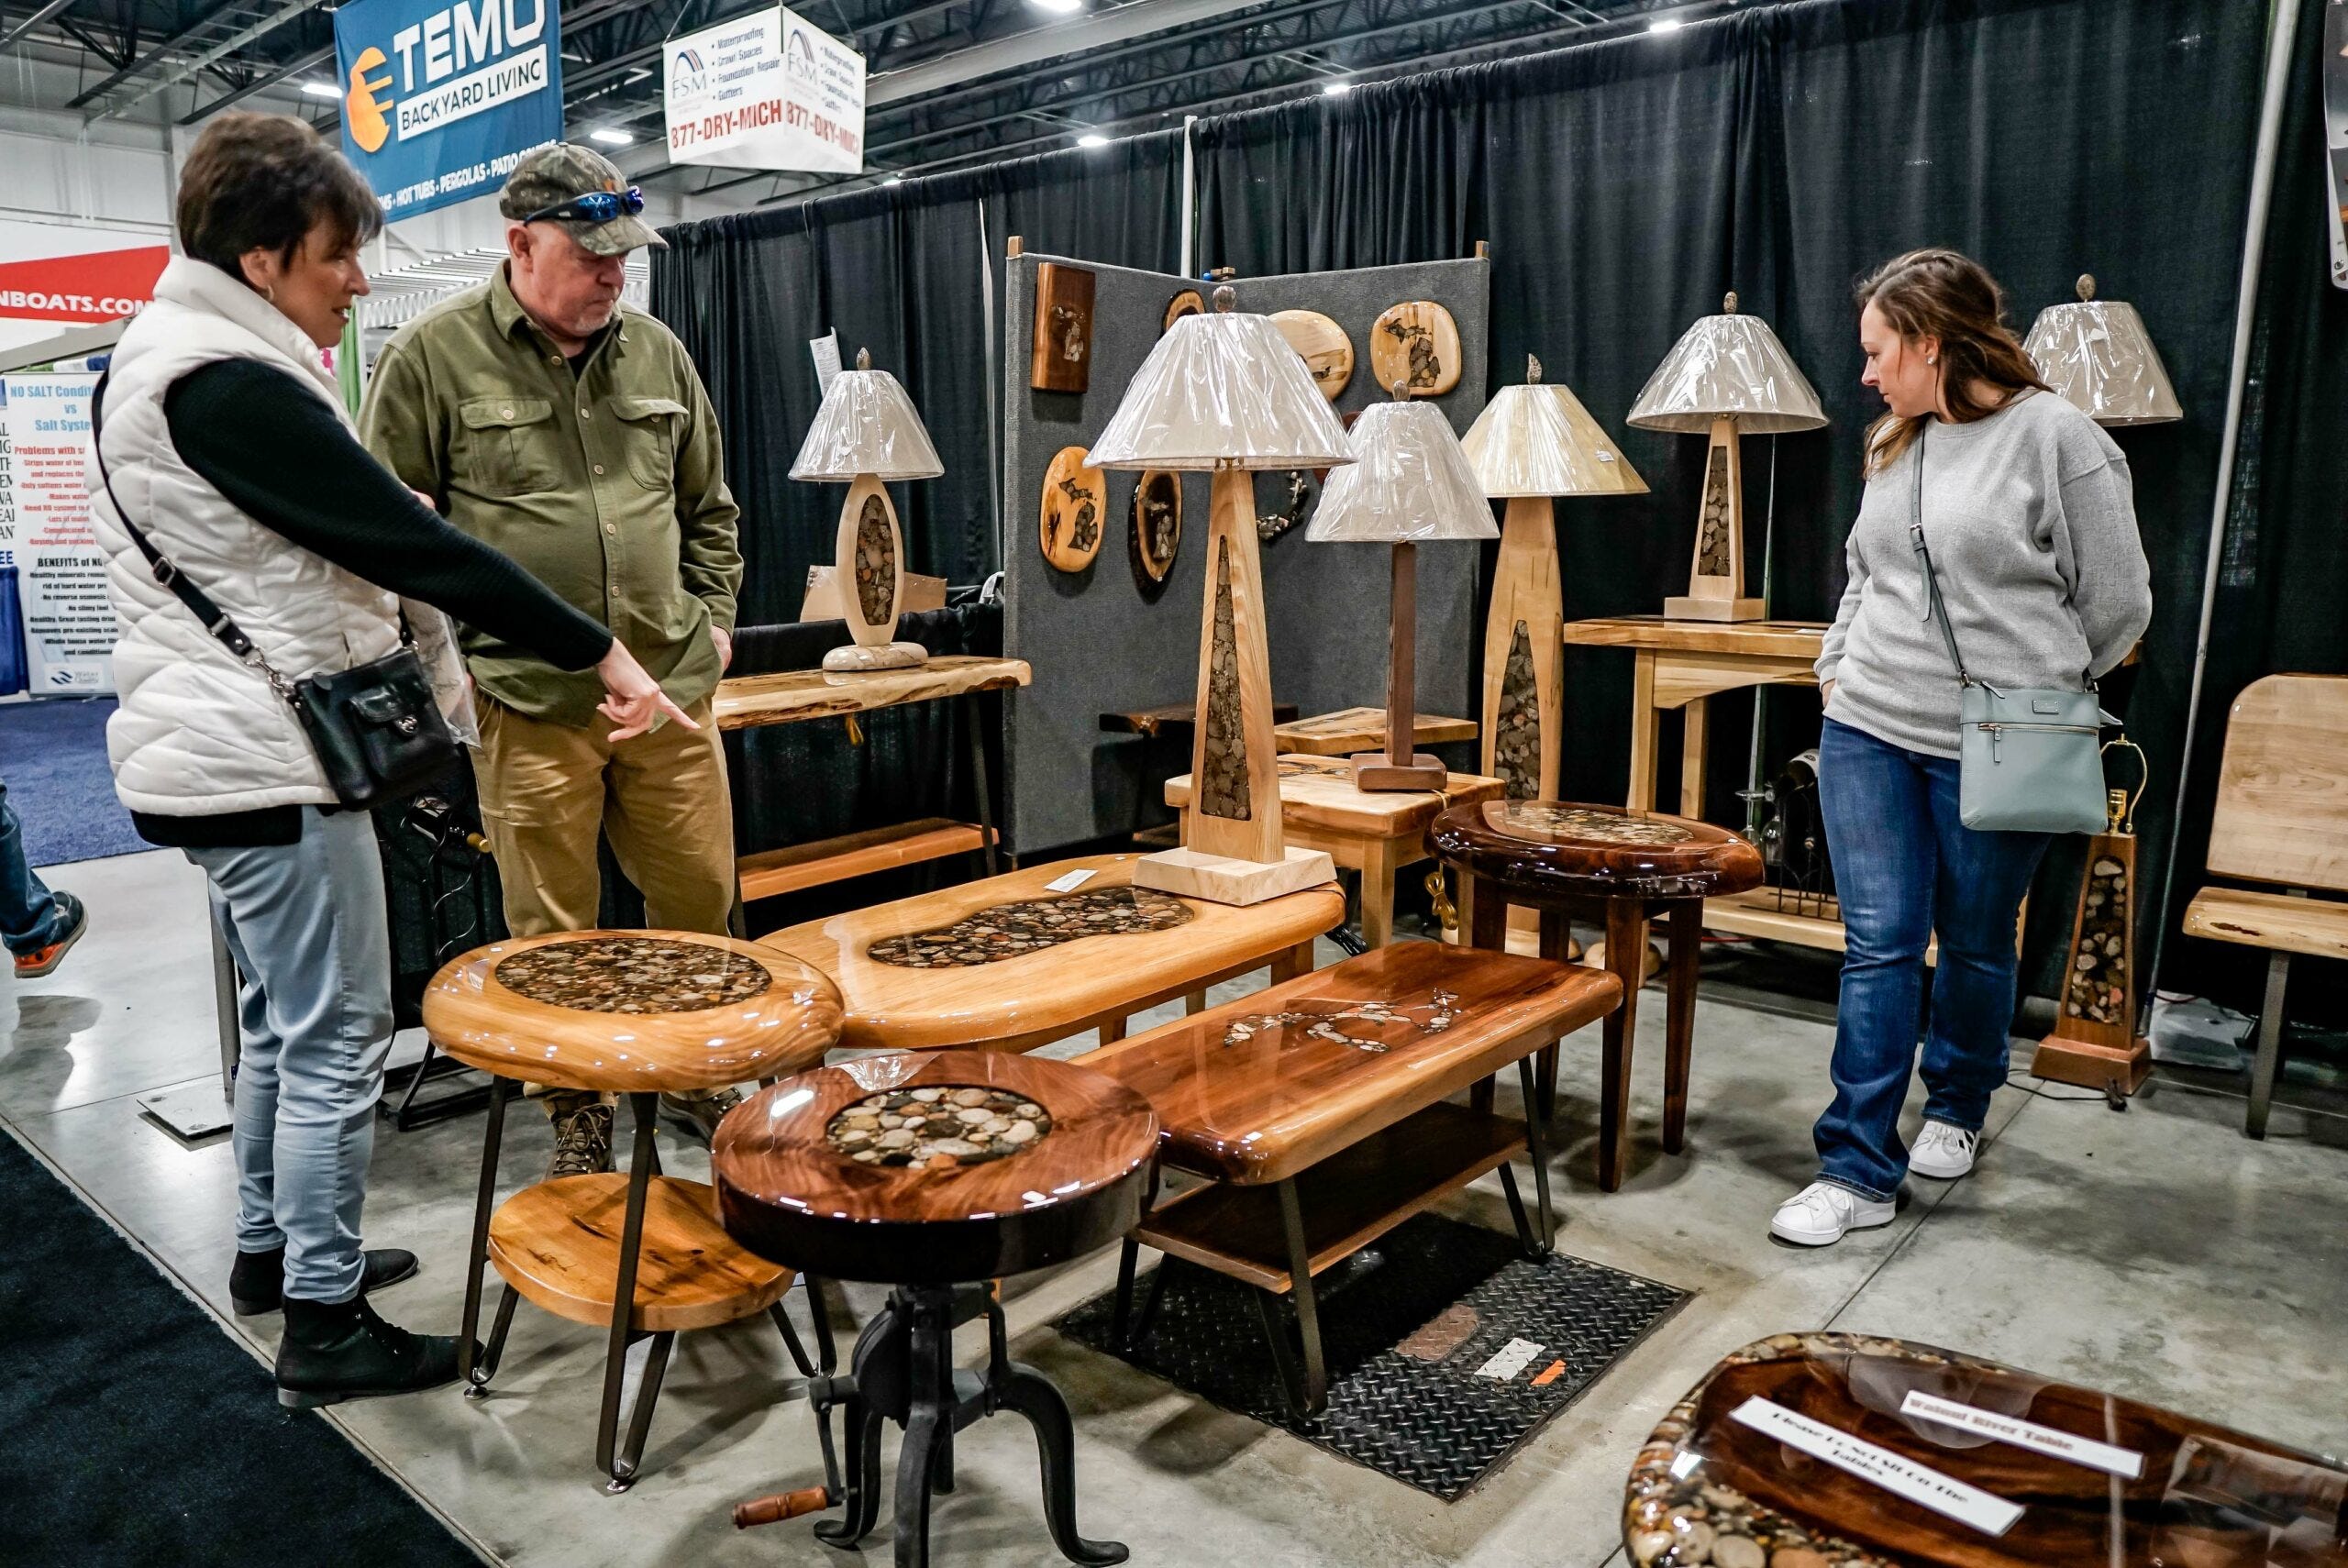 The 17th annual Cottage & Lakefront Living Feb. 22 through Feb. 25 at the Suburban Collection Showplace in Novi.